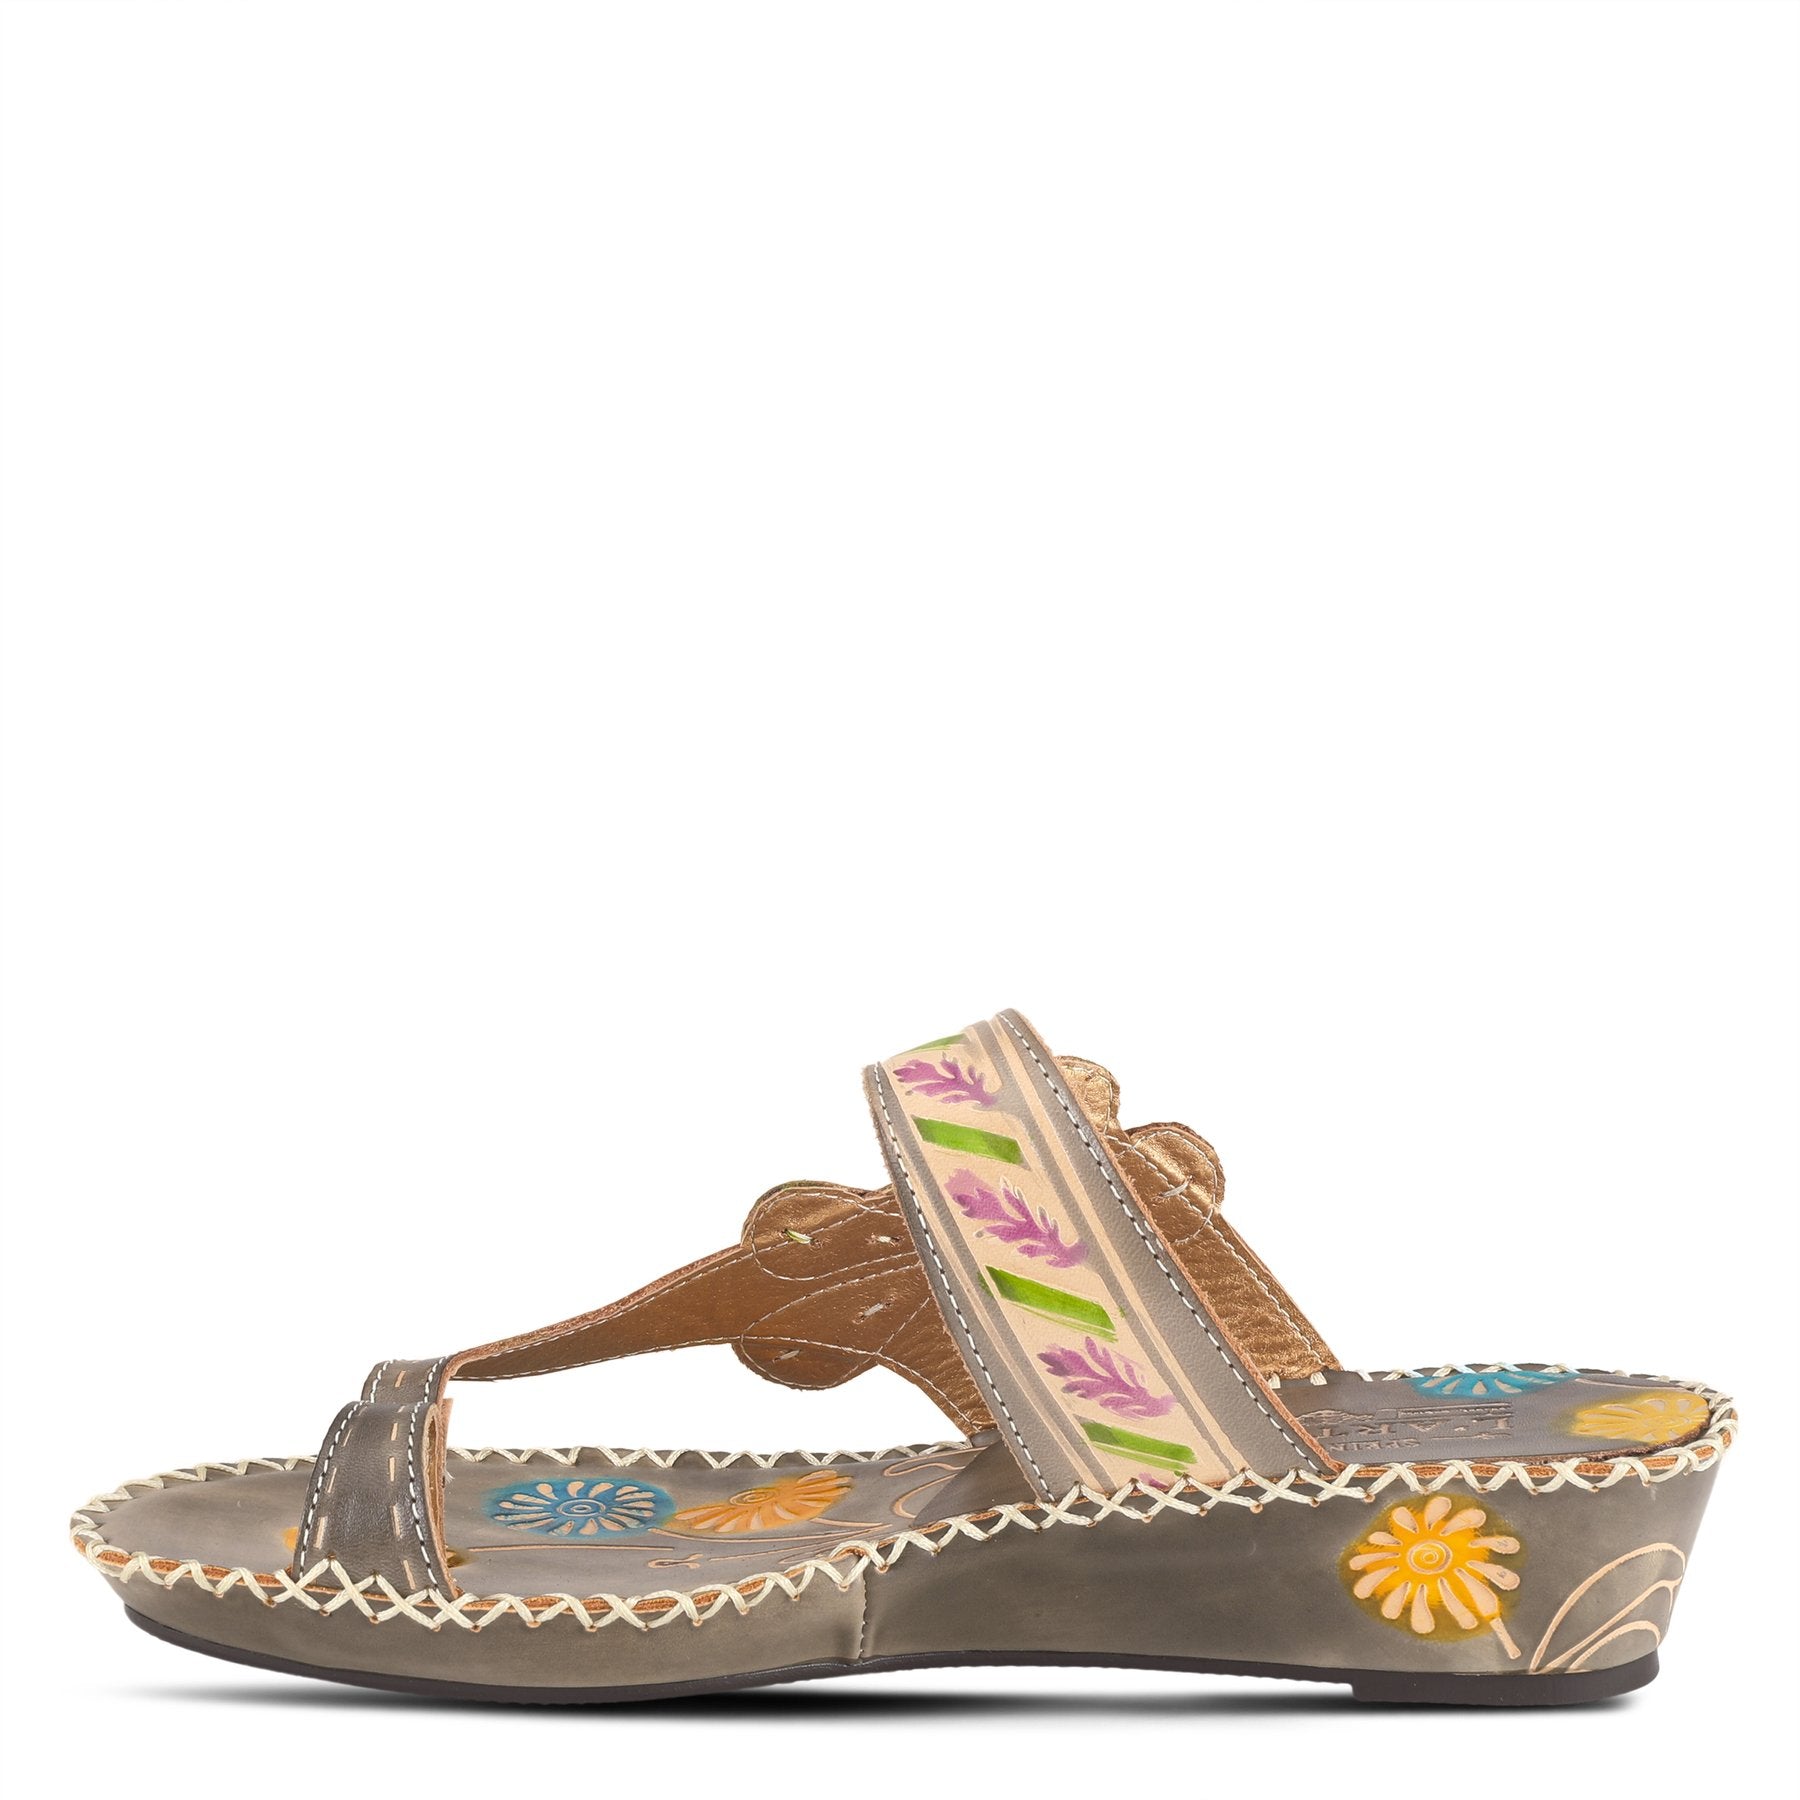 Inner side of the l'artiste santorini slide sandal. This sandal is grey with colorful flowers painted all over the sole, a toe-ring thong, and an adjustable buckle strap.